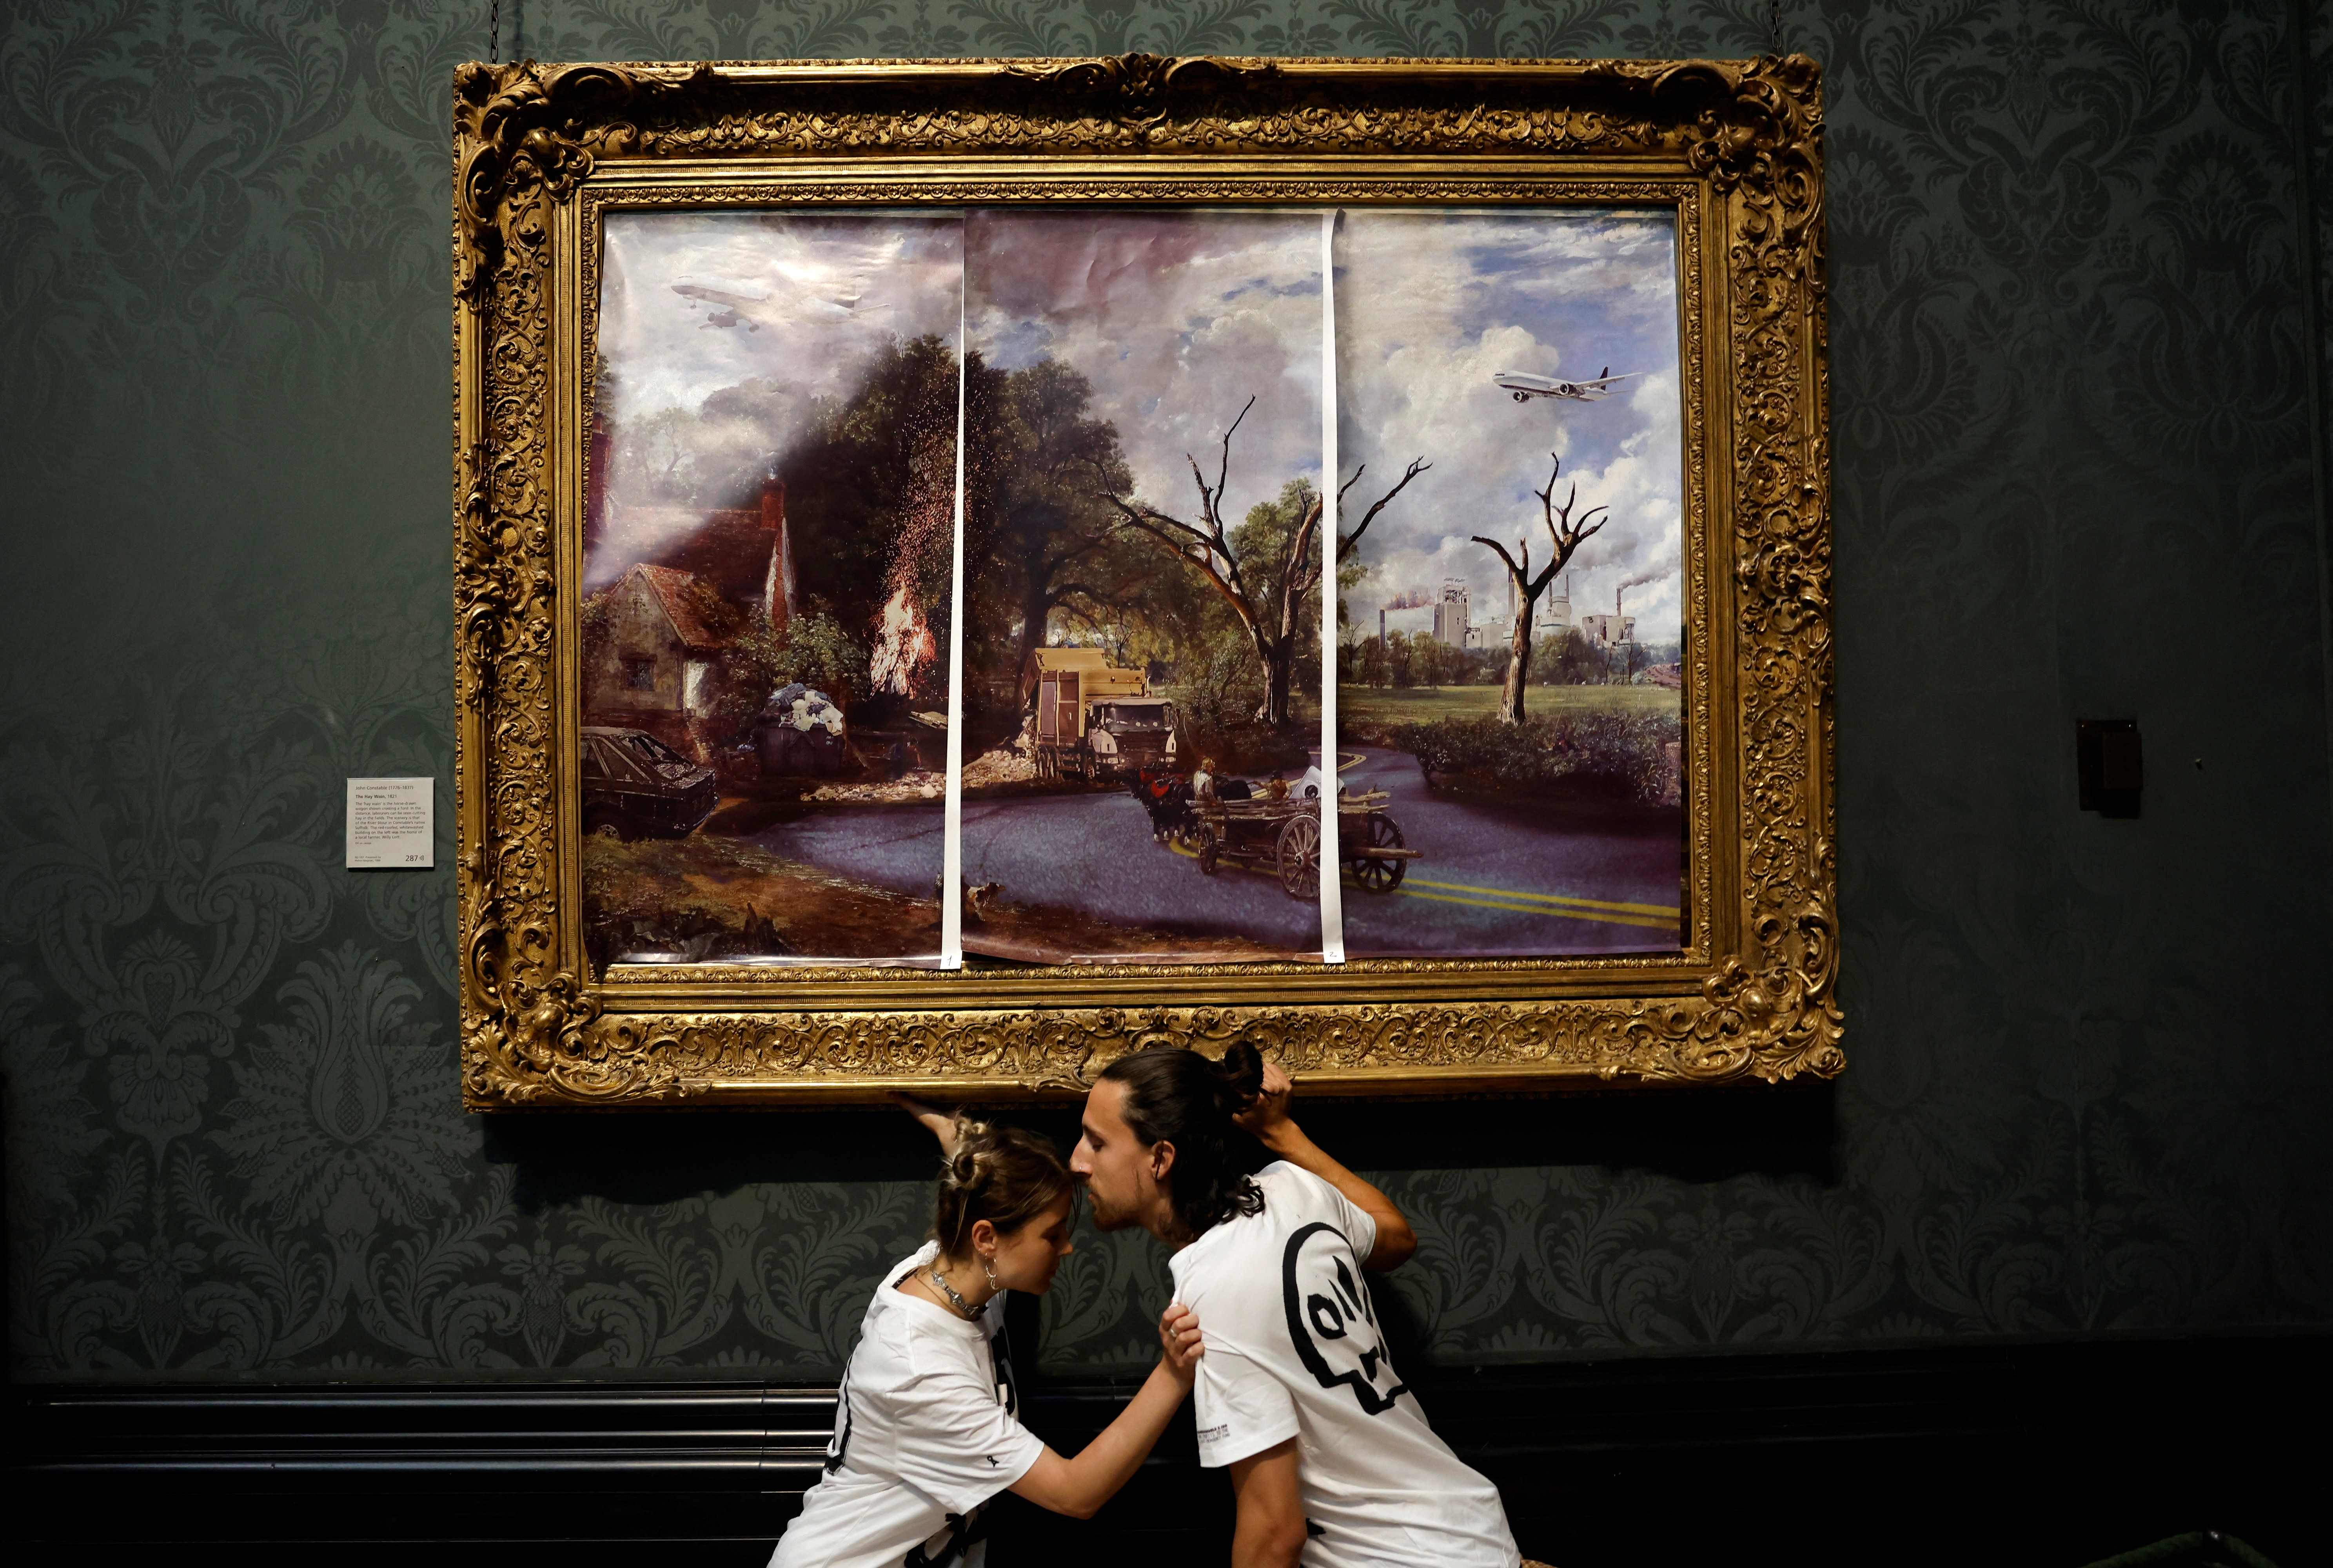 The pair covered Constable’s masterpiece in a mock ‘undated’ version including roads and aircraft